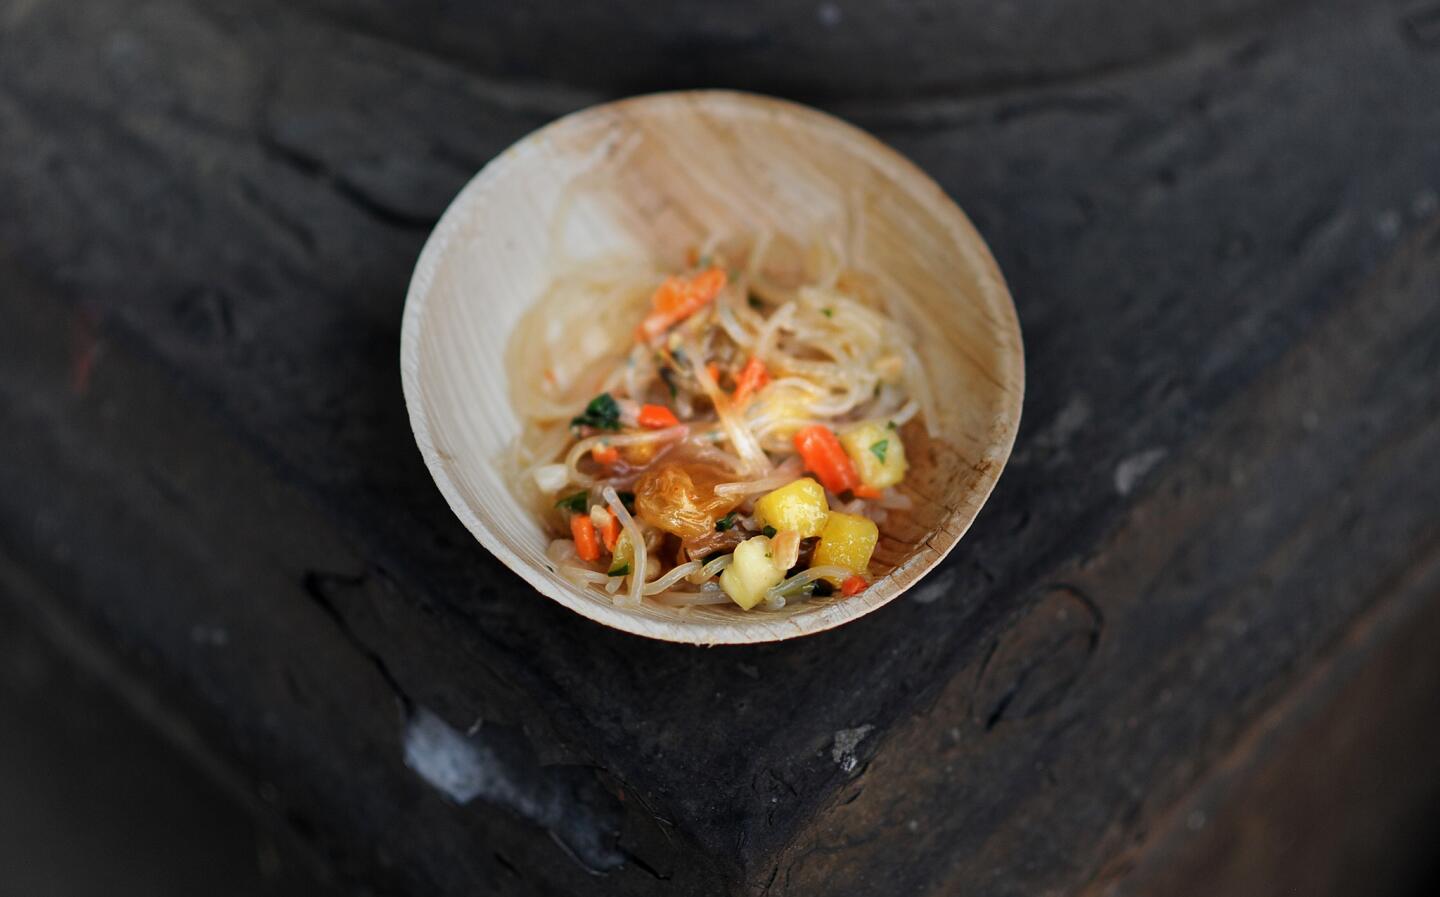 The glass noodle salad by Asian Box